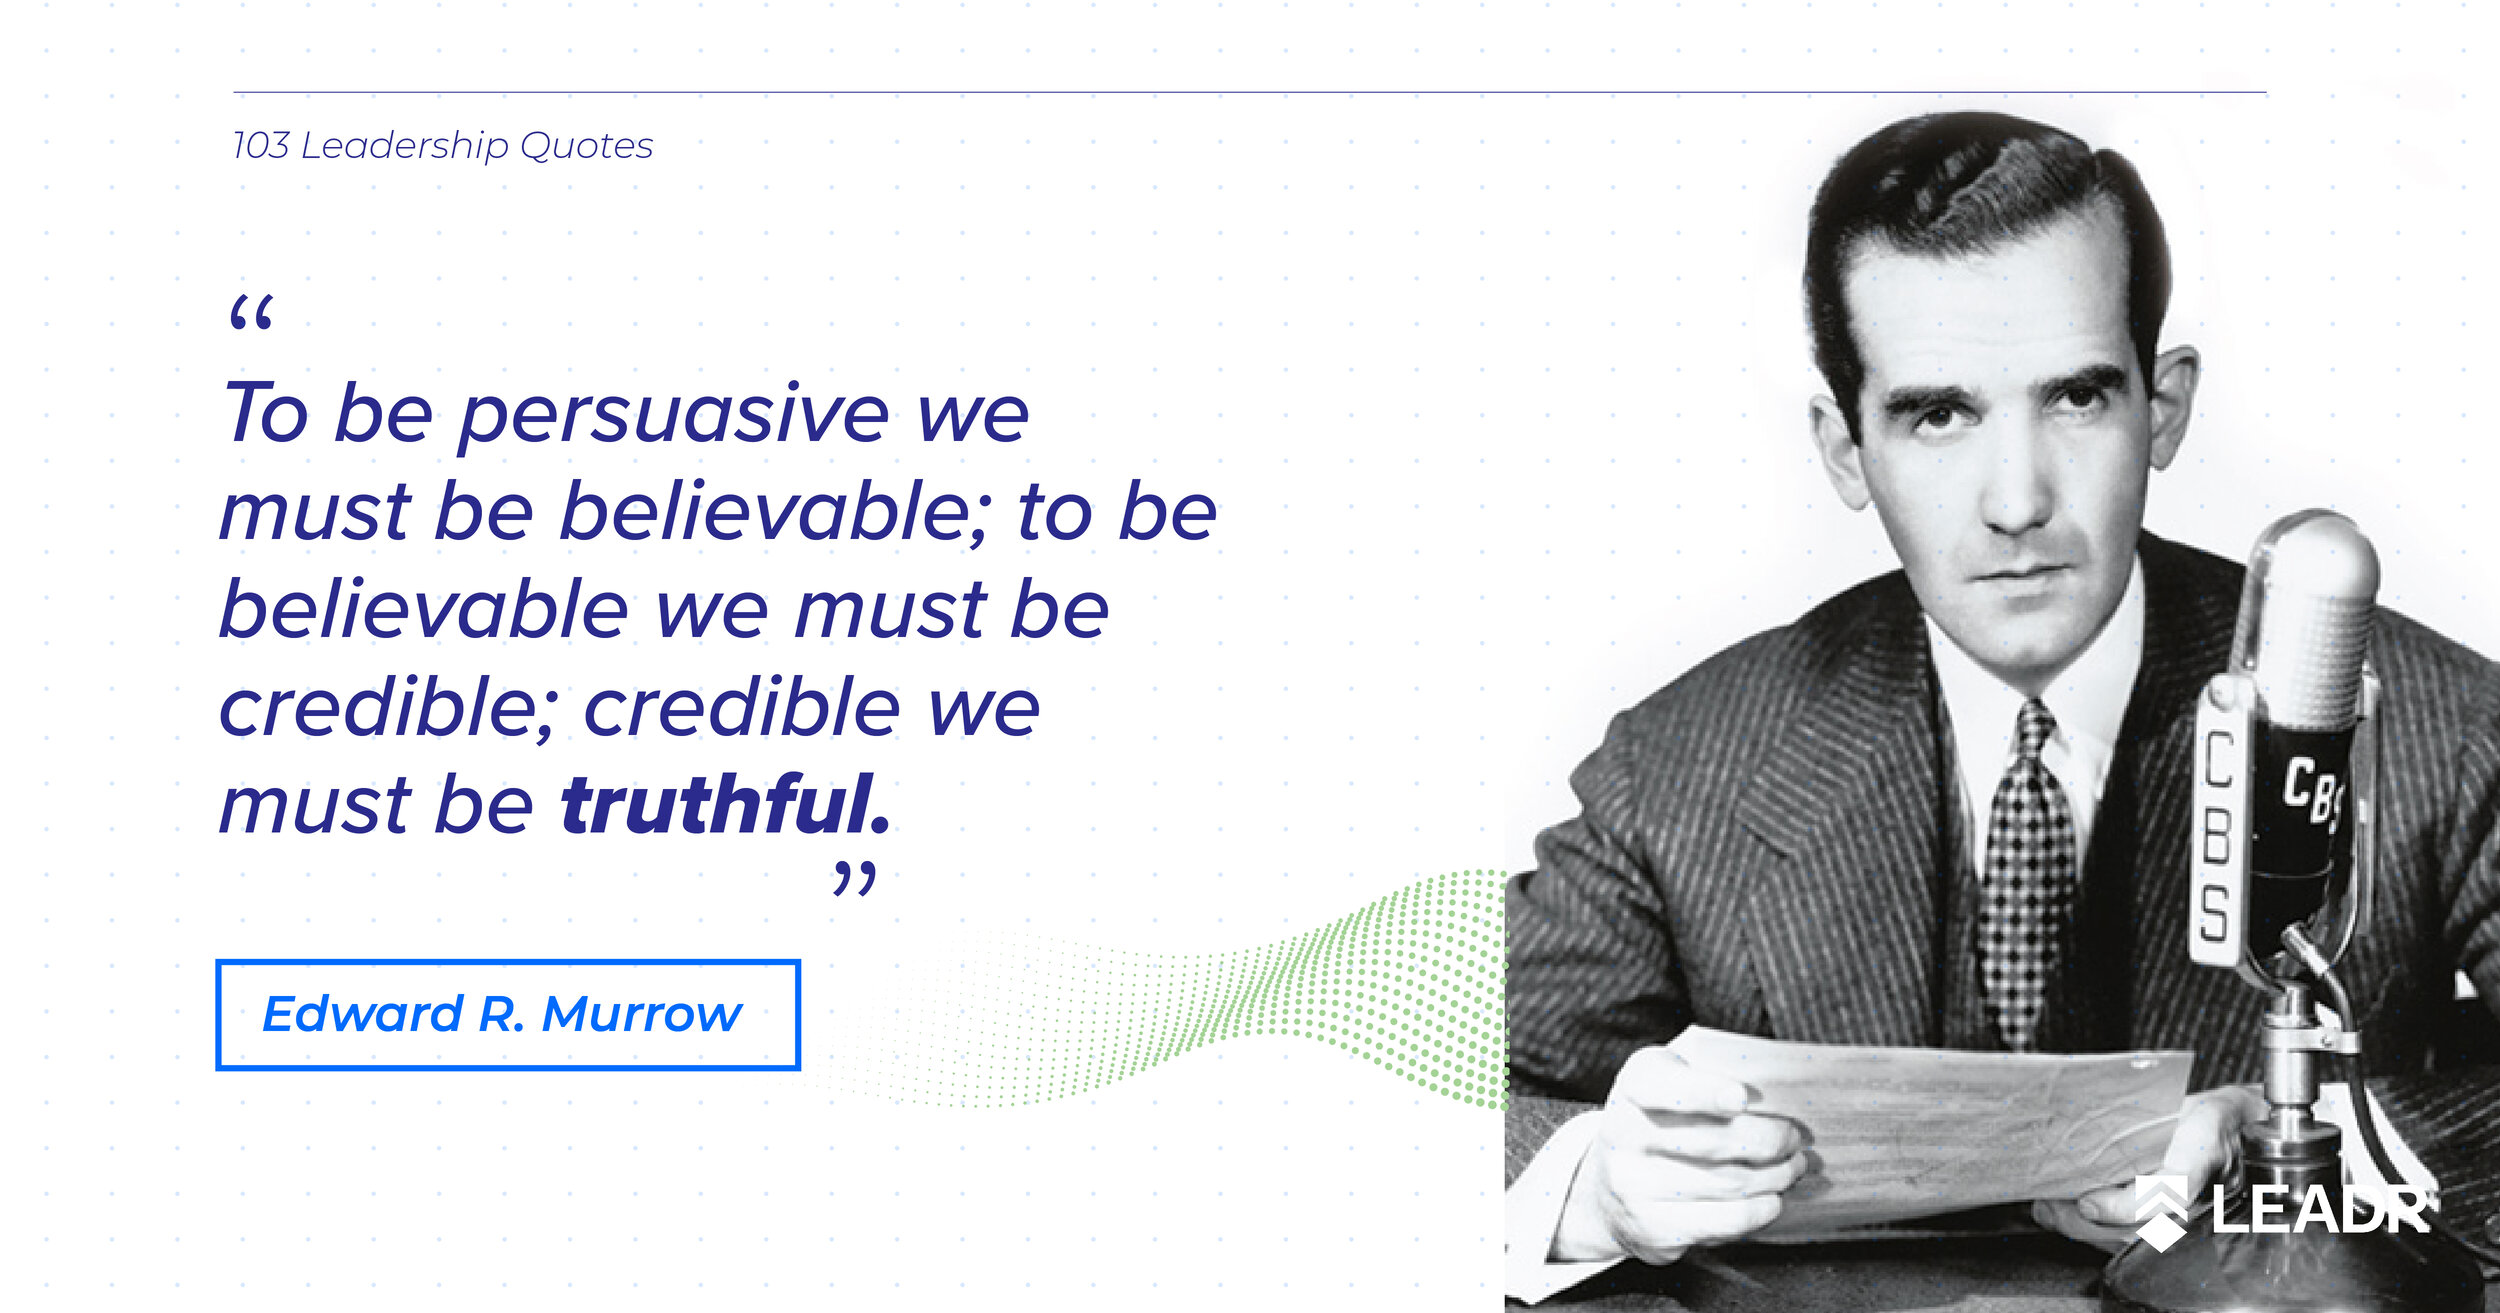 Royalty free downloadable leadership quotes - Edward R. Murrow